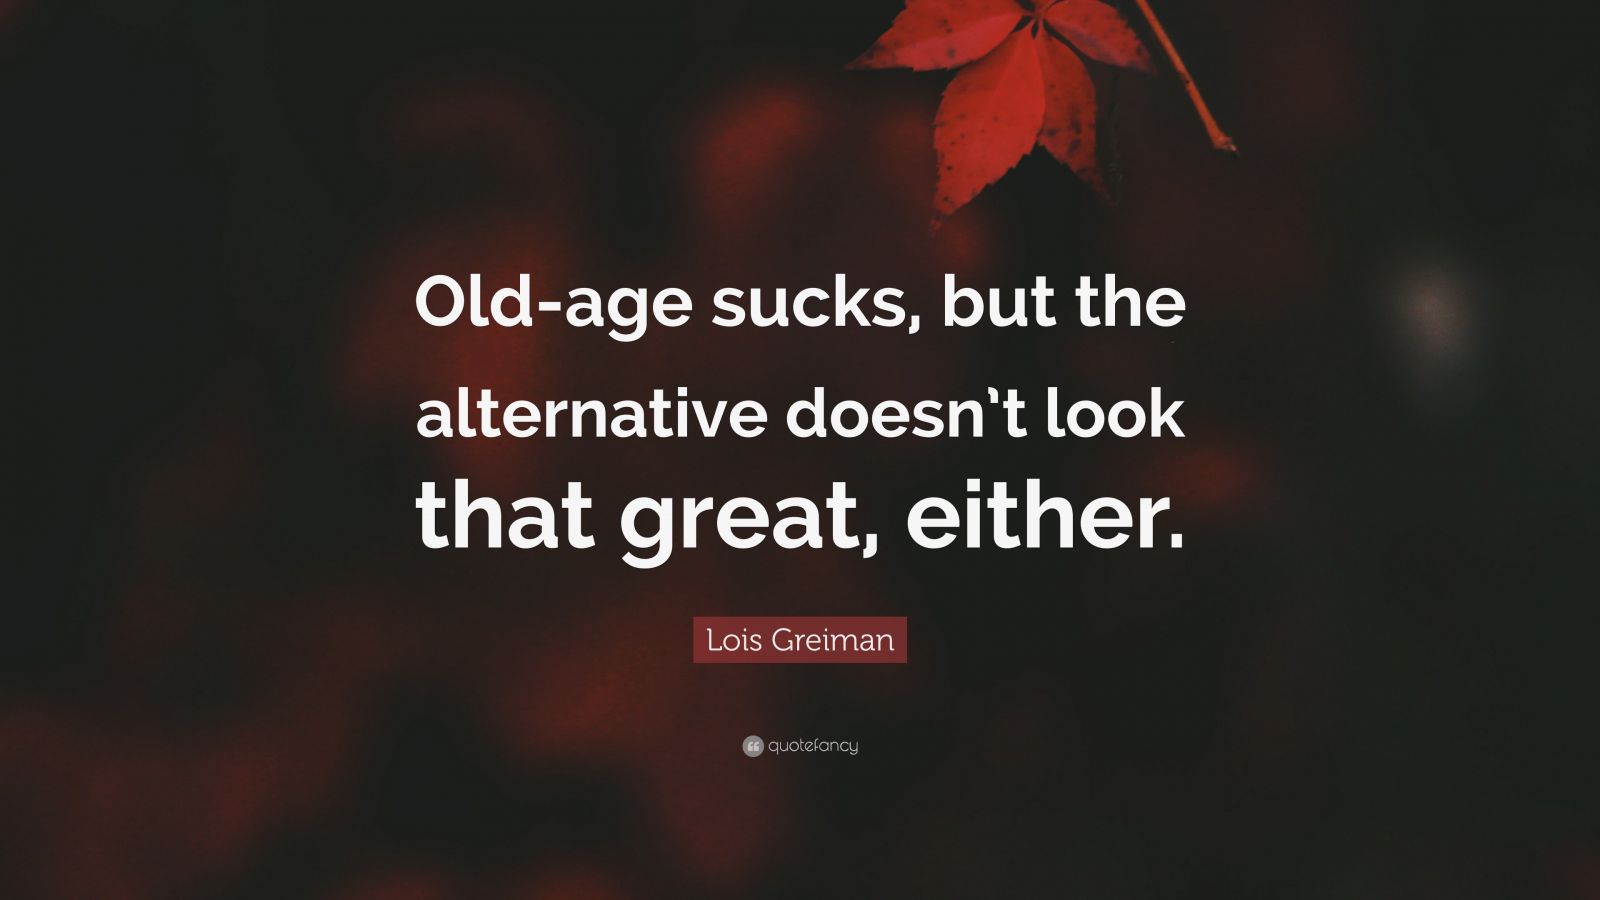 Lois Greiman Quote: “Old-age sucks, but the alternative doesn’t look ...